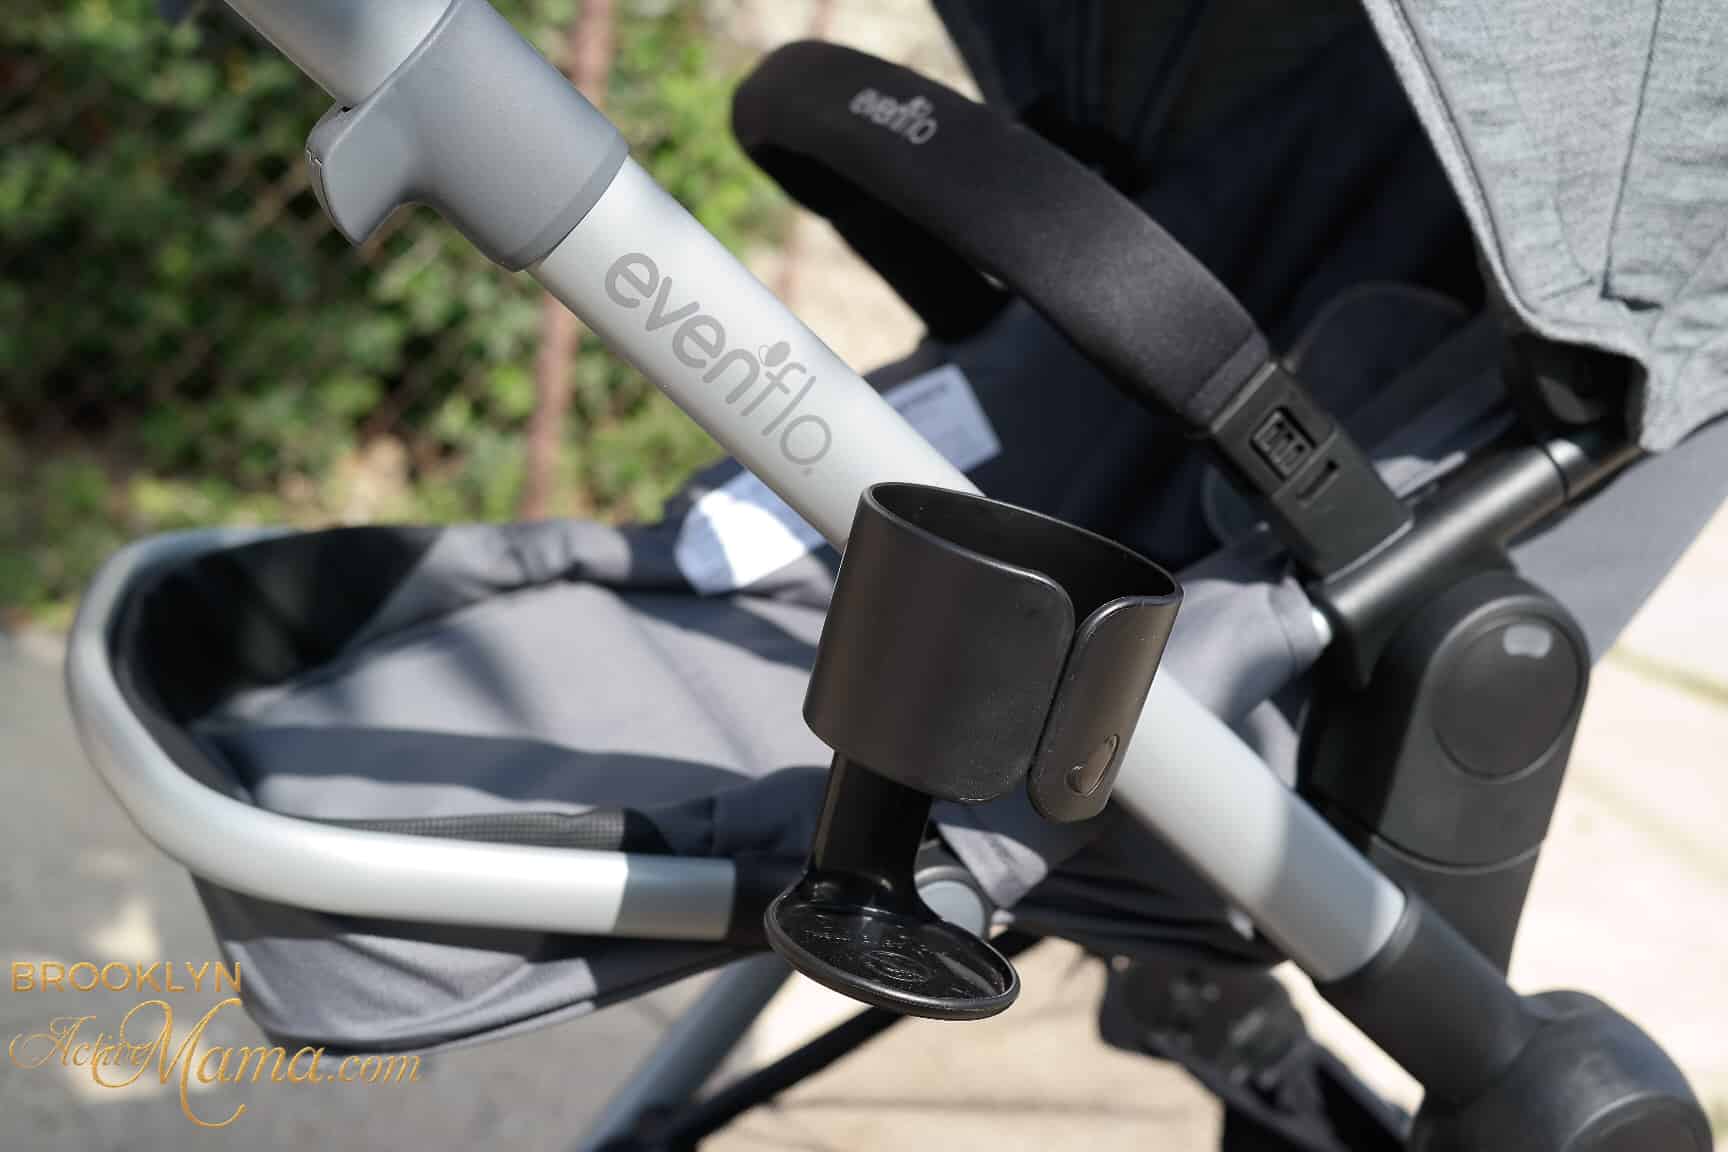 One of the most important accessories for a new baby is your stroller. Check out this full review of the Evenflo Pivot Xpand